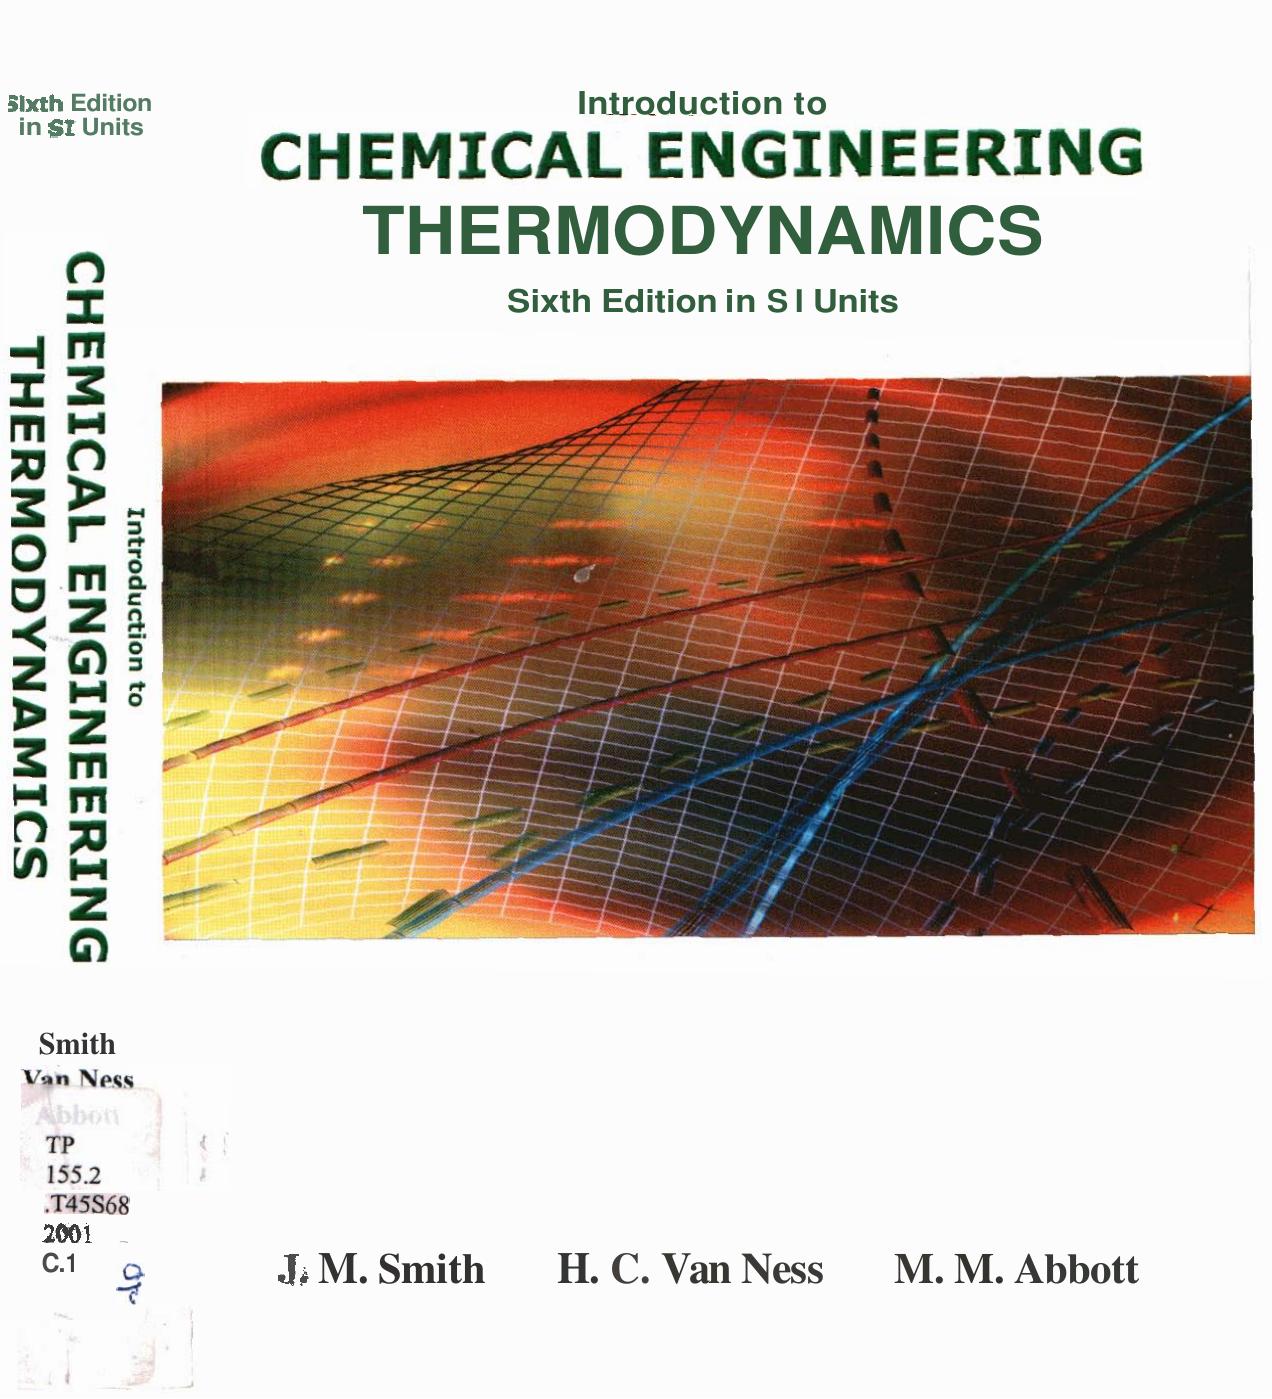 introdunction to chemical engineering thermodynamic                                                                    2001